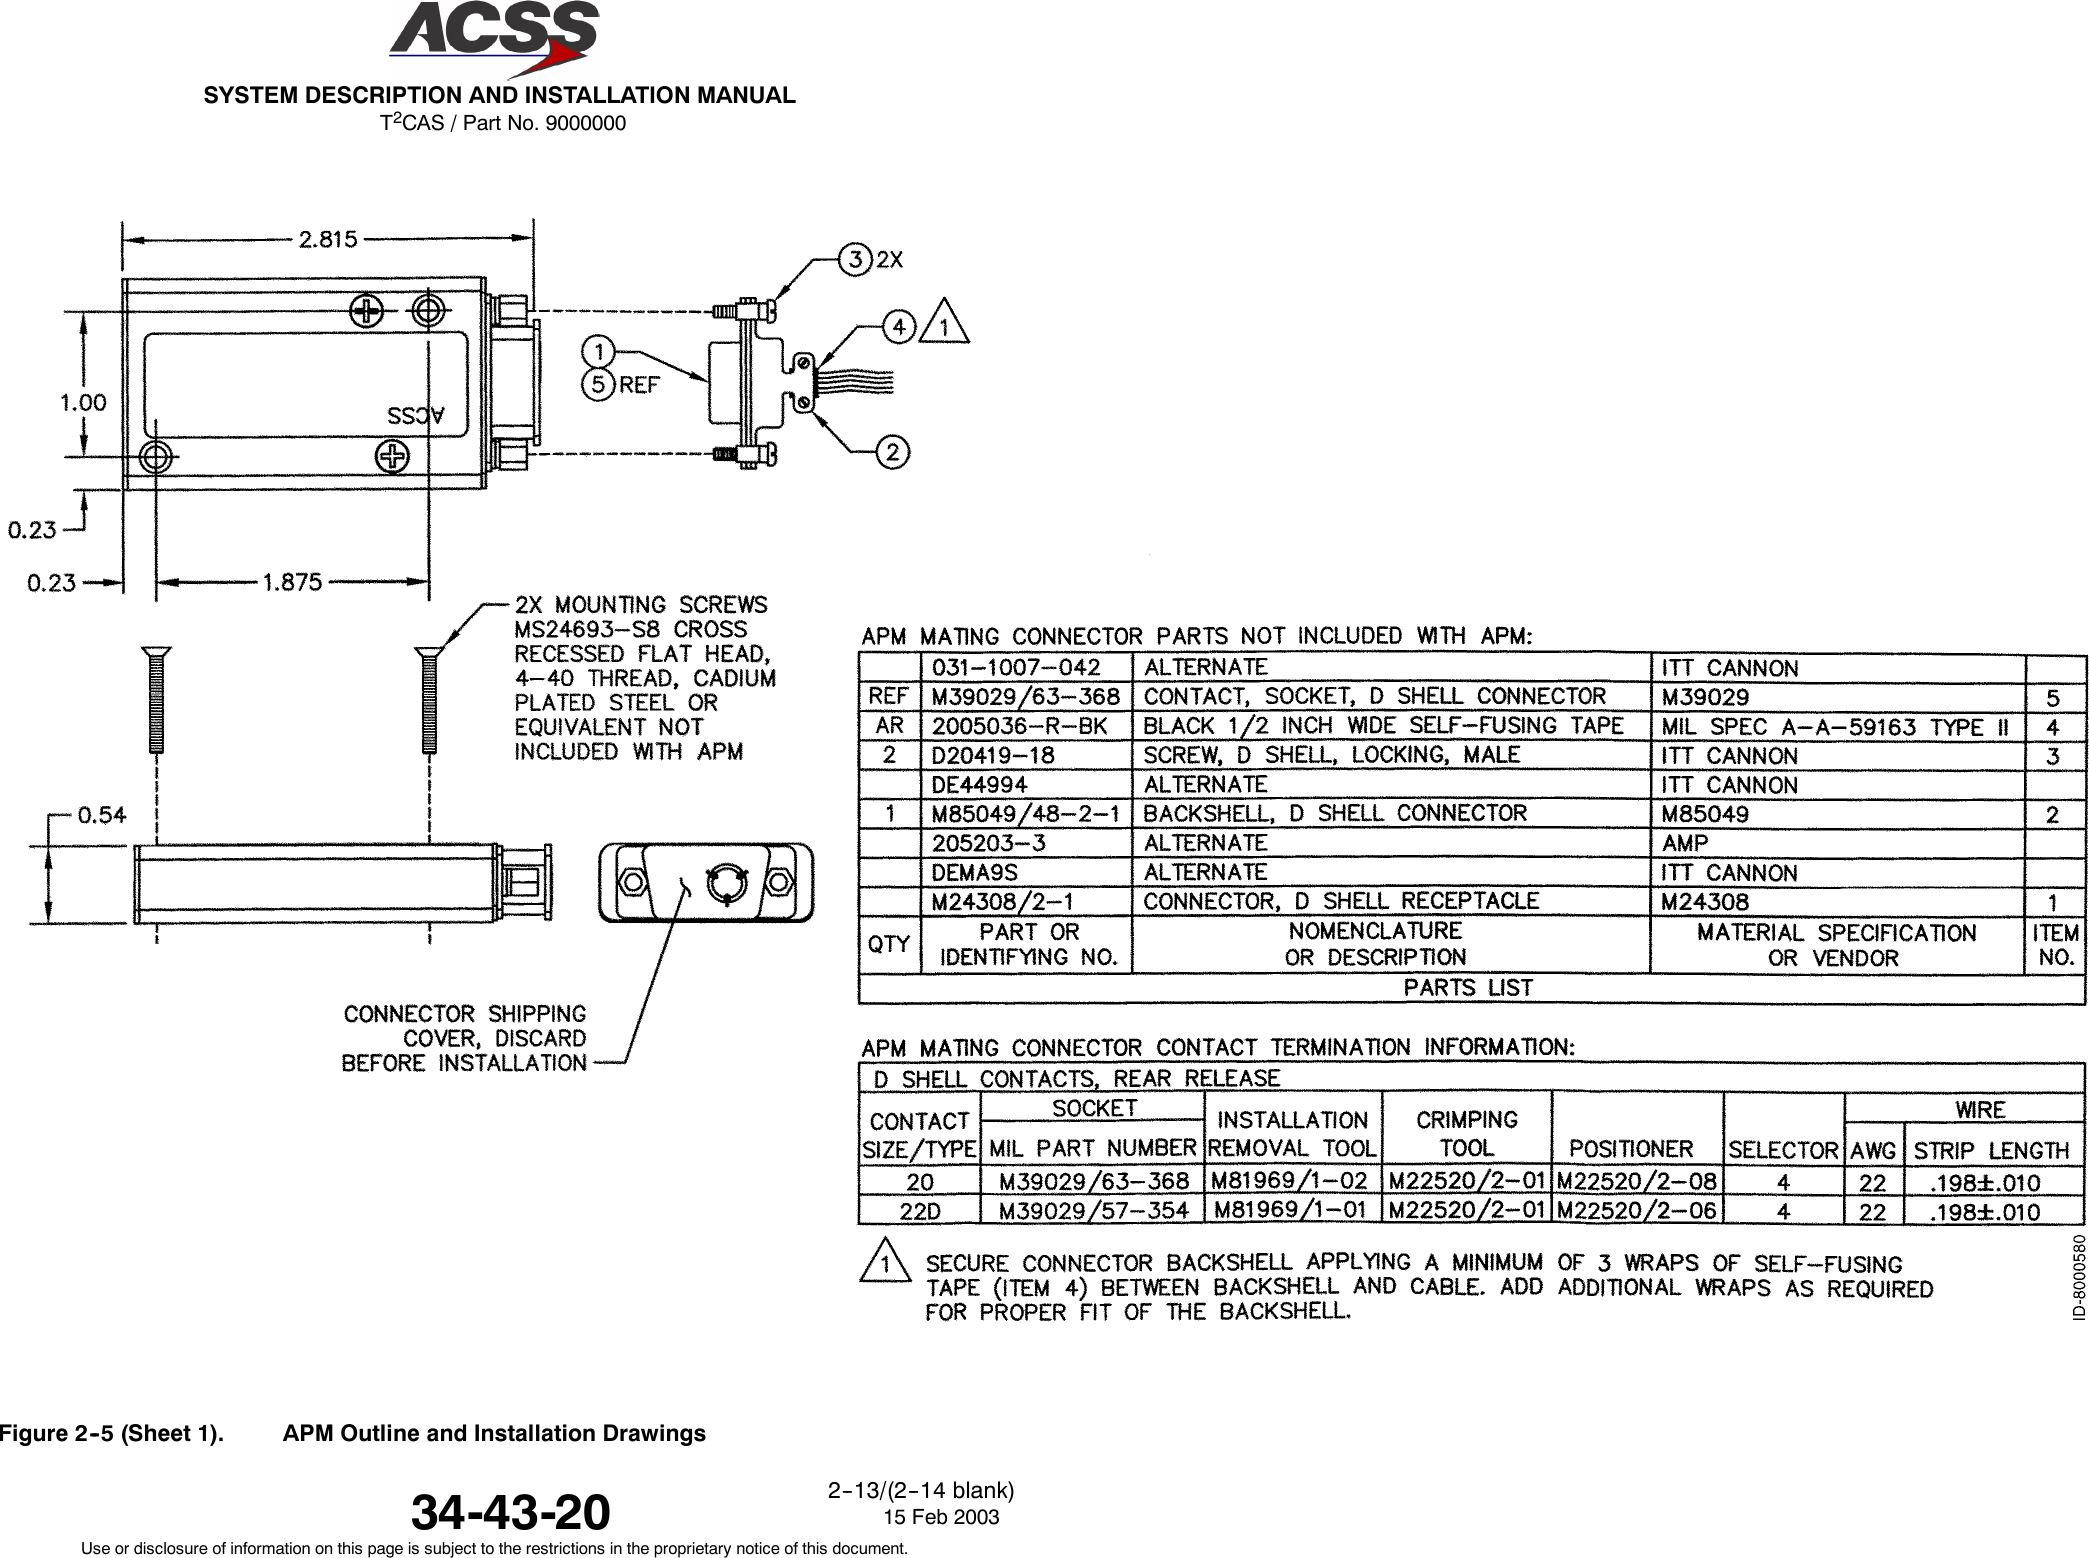 T2CAS / Part No. 9000000SYSTEM DESCRIPTION AND INSTALLATION MANUAL34-43-20 15 Feb 2003Use or disclosure of information on this page is subject to the restrictions in the proprietary notice of this document.2--13/(2--14 blank)Figure 2--5 (Sheet 1). APM Outline and Installation Drawings